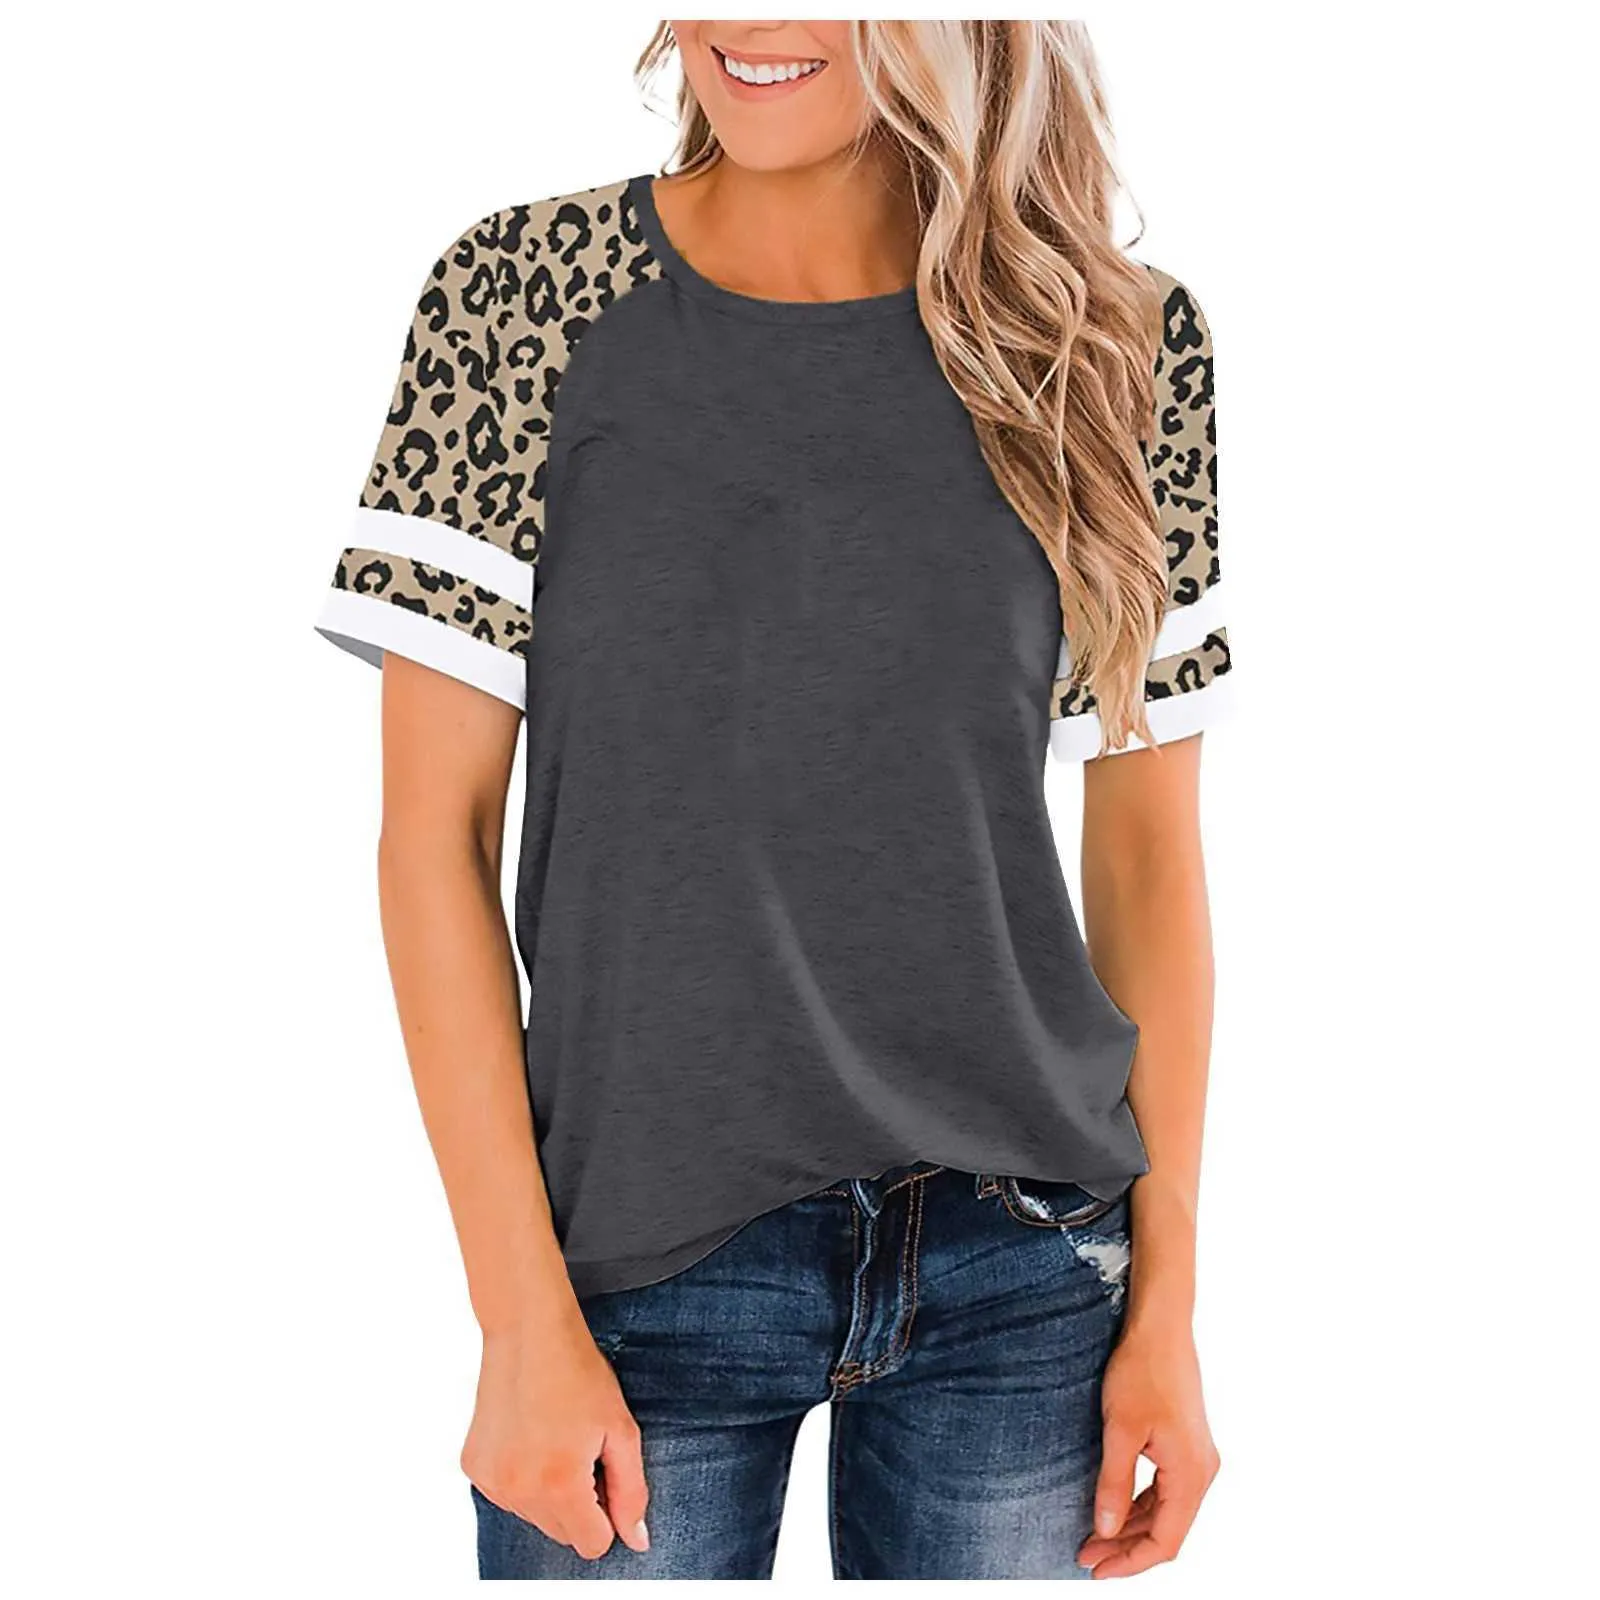 Leopard print short-sleeved top fashion women's loose O-neck hit color tees casual and comfortable plus size T-shirt summer 2021 Y0621